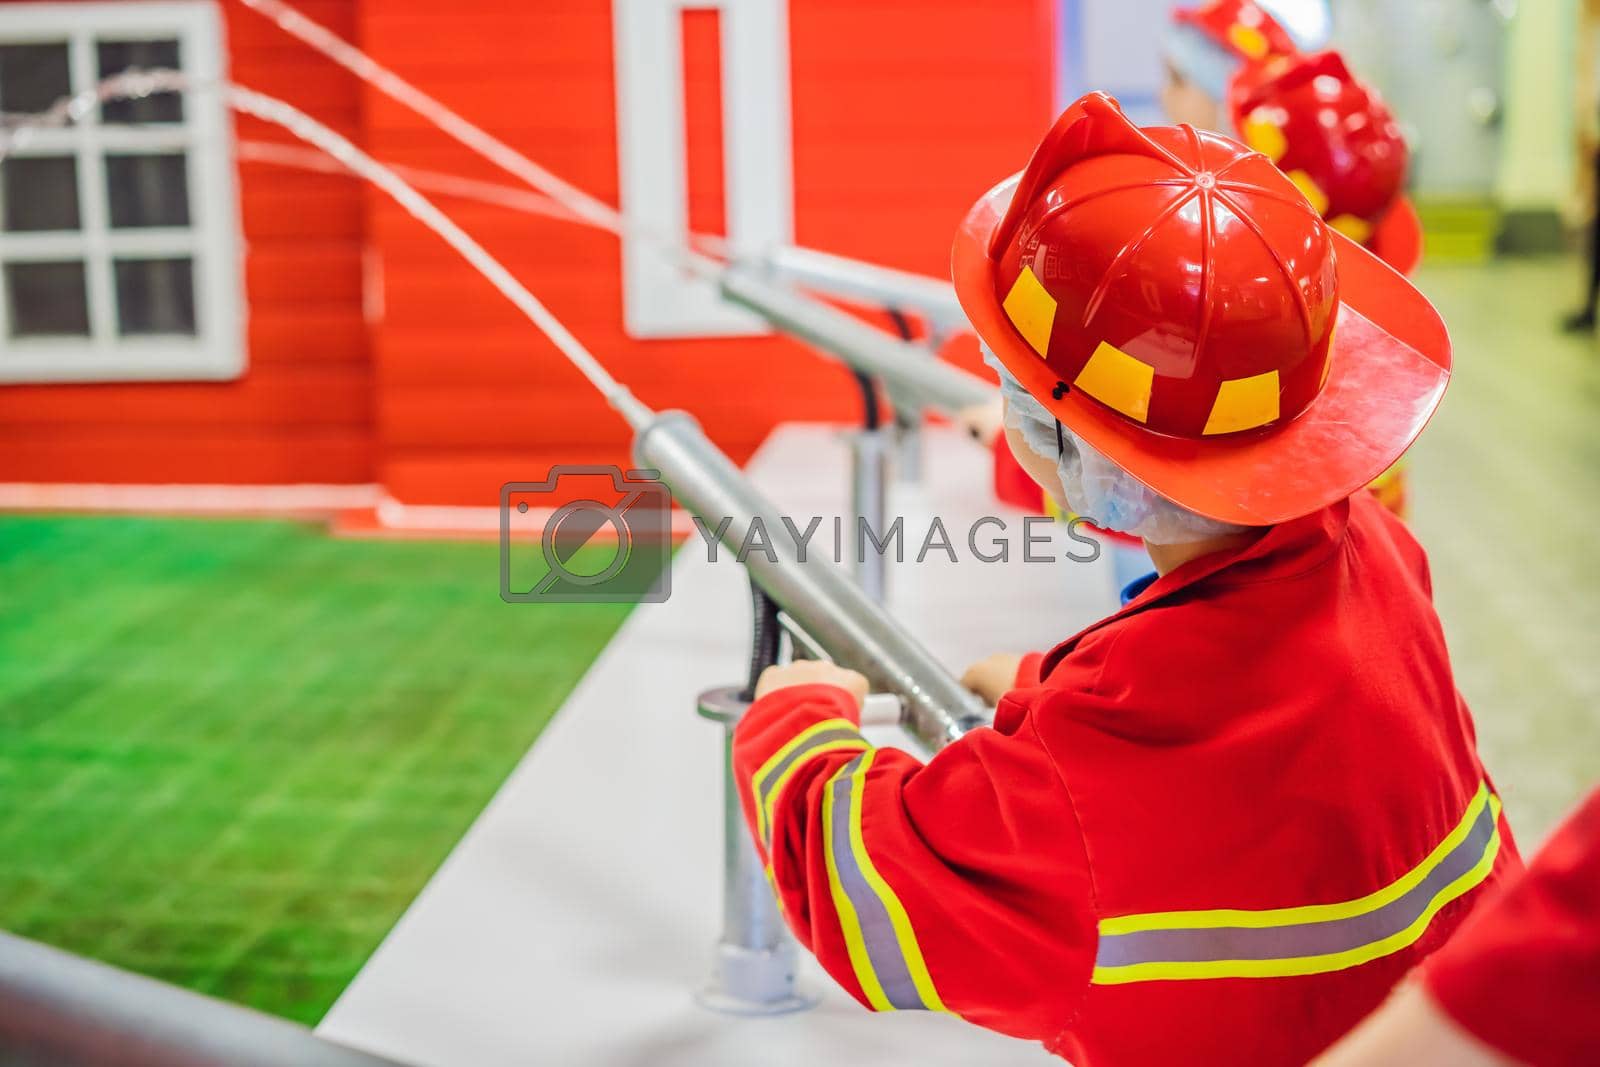 Royalty free image of Expressive cute toddler with fireman's outfit playing fireman by galitskaya